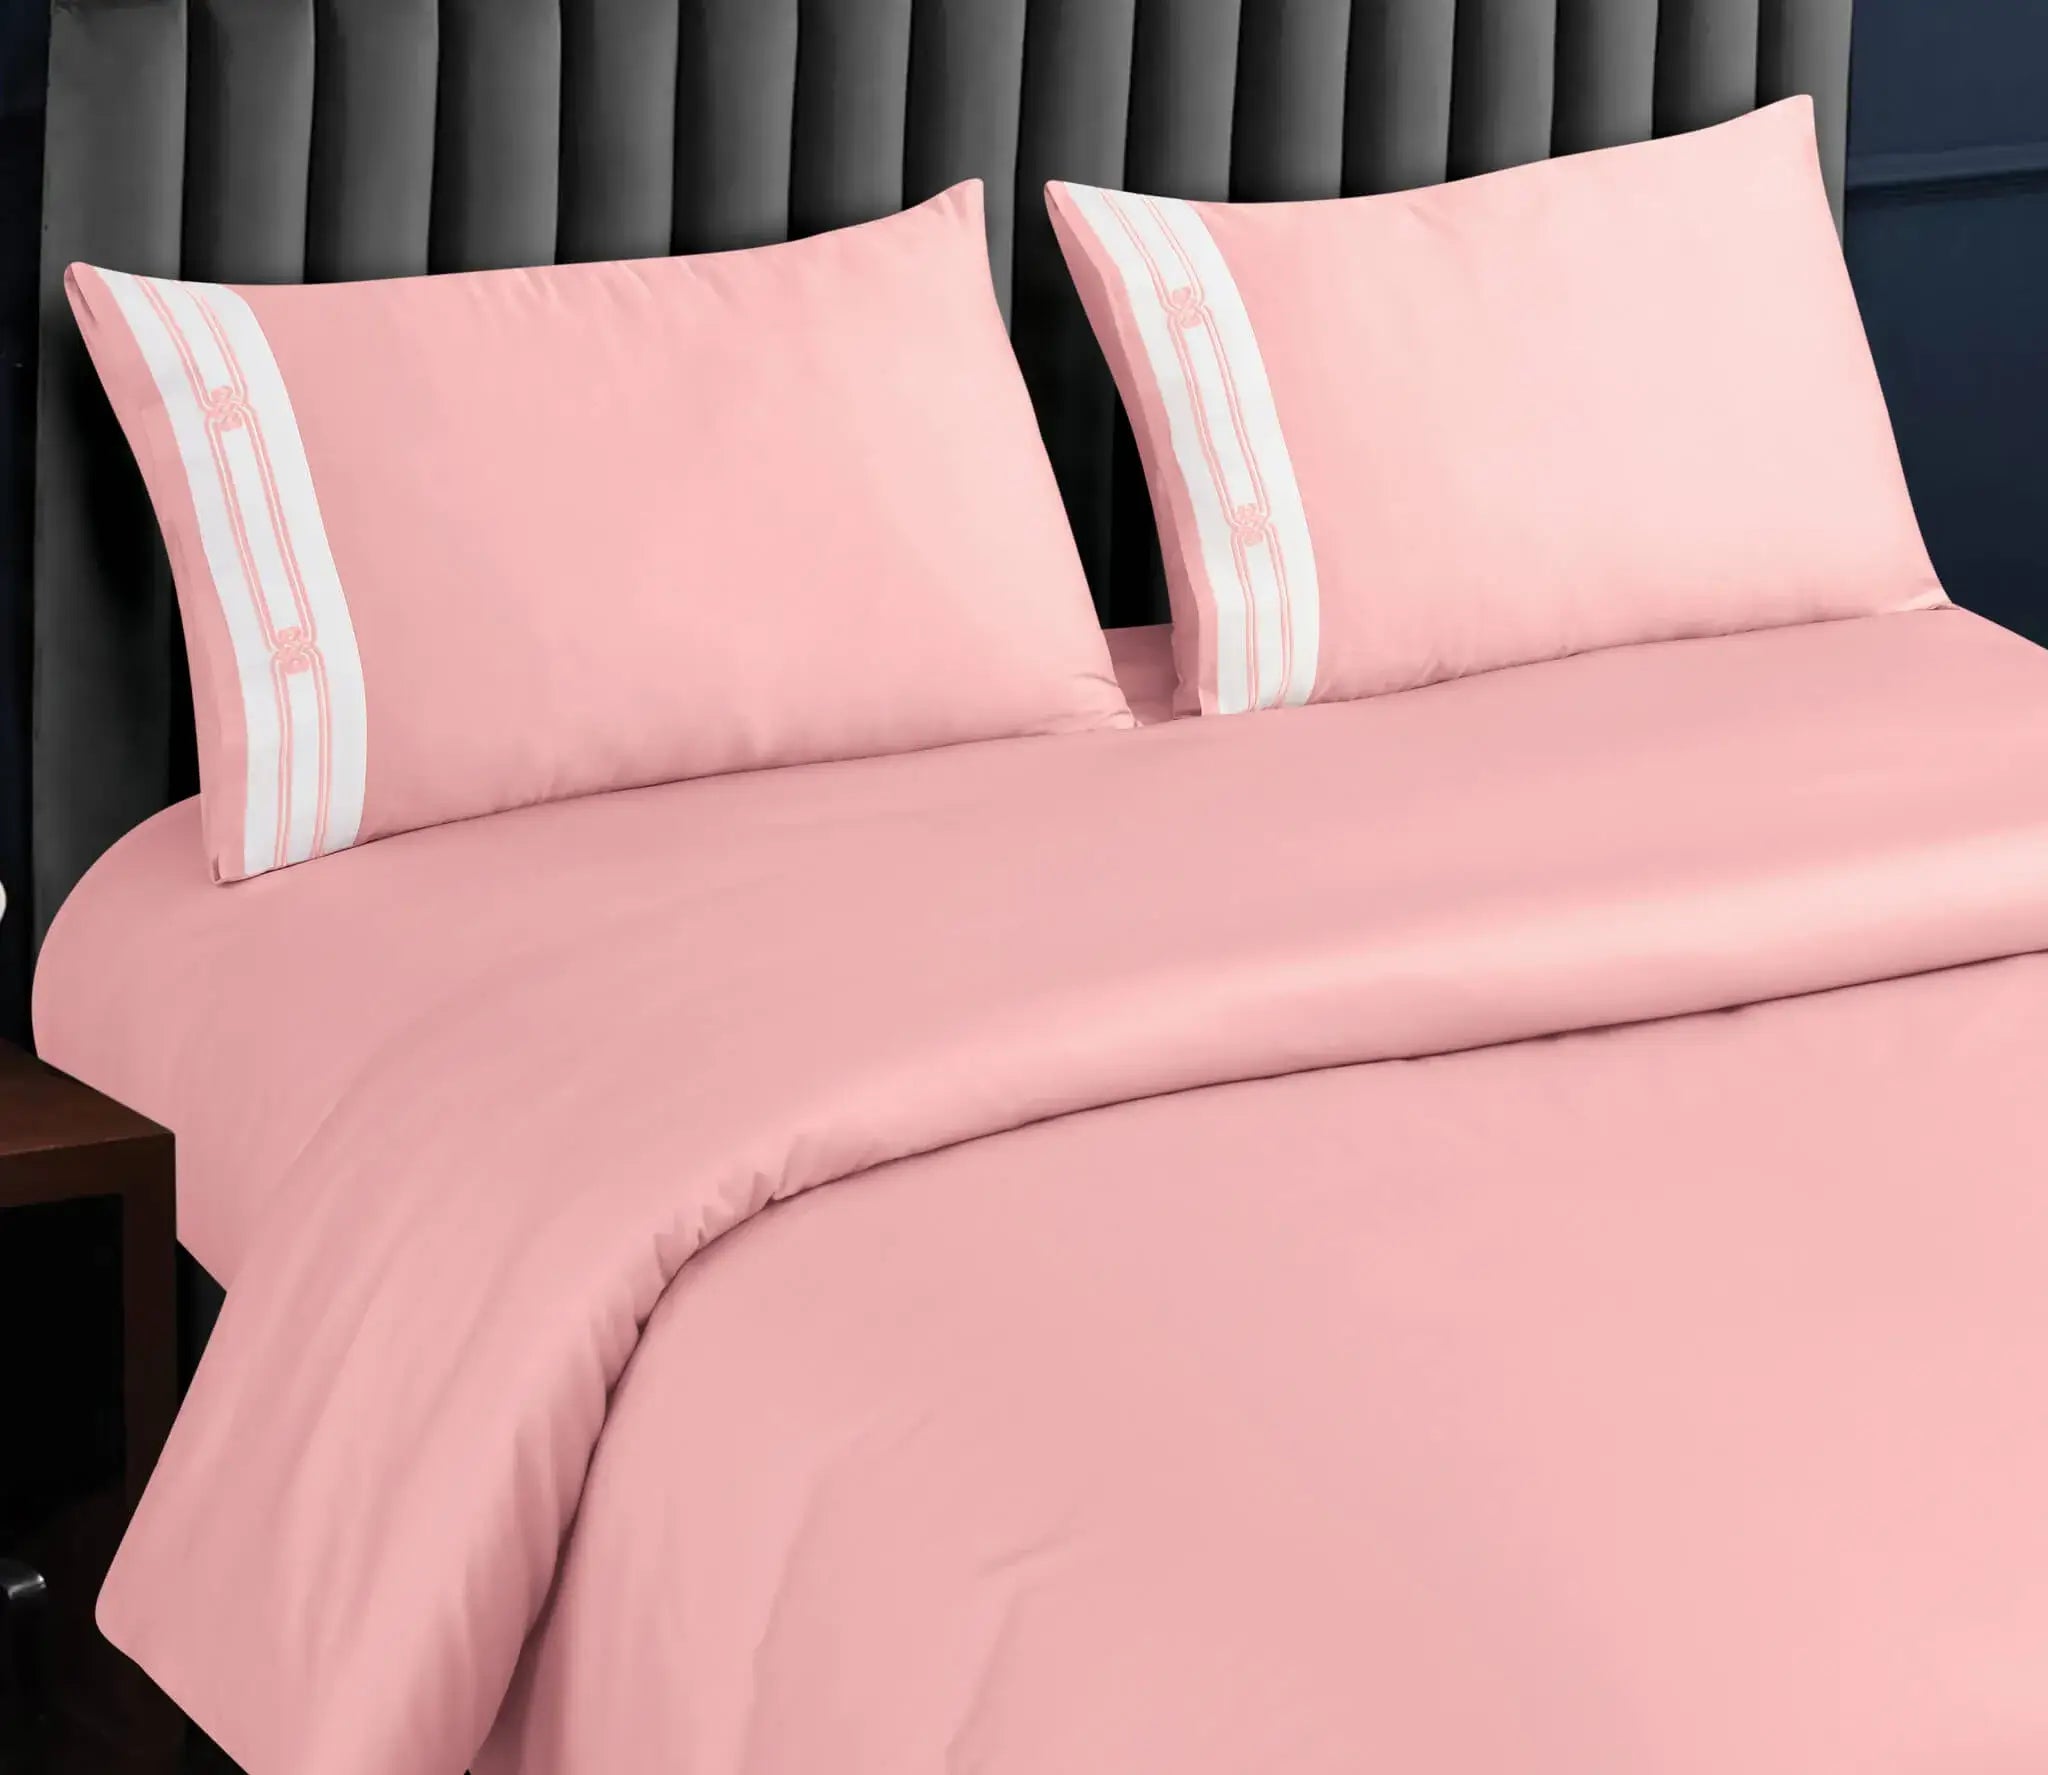 Malako Vivid Embroidered 500 TC King Size 100% Cotton Pintex Bedding - Rose  Pink / 1 Bedsheet + 2 Embroidered Pillow Covers + 2 Plain Pillow Covers